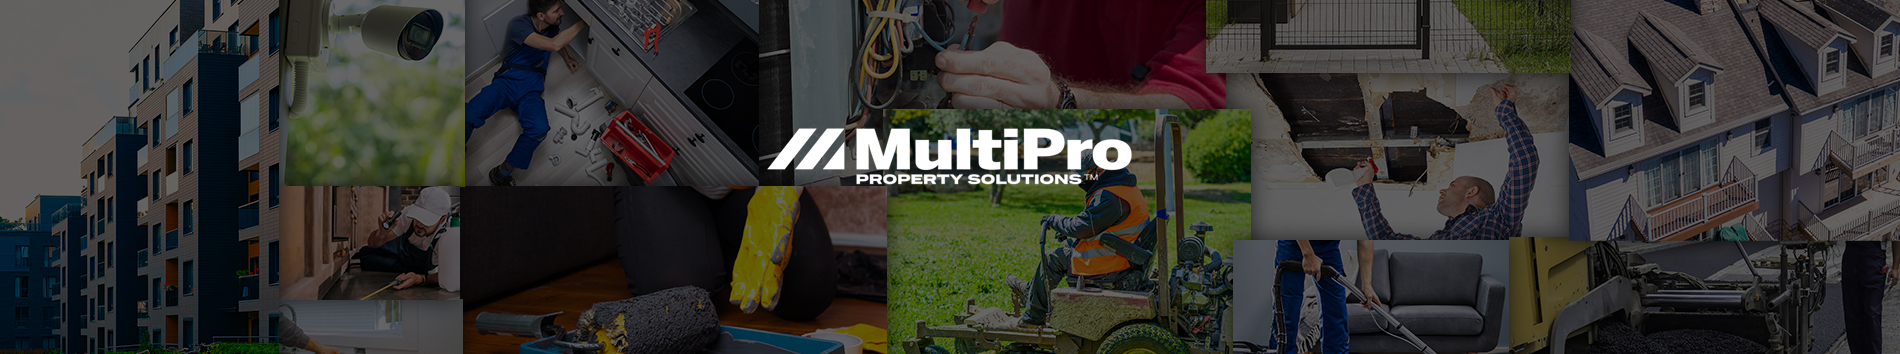 MultiPro Property Solutions